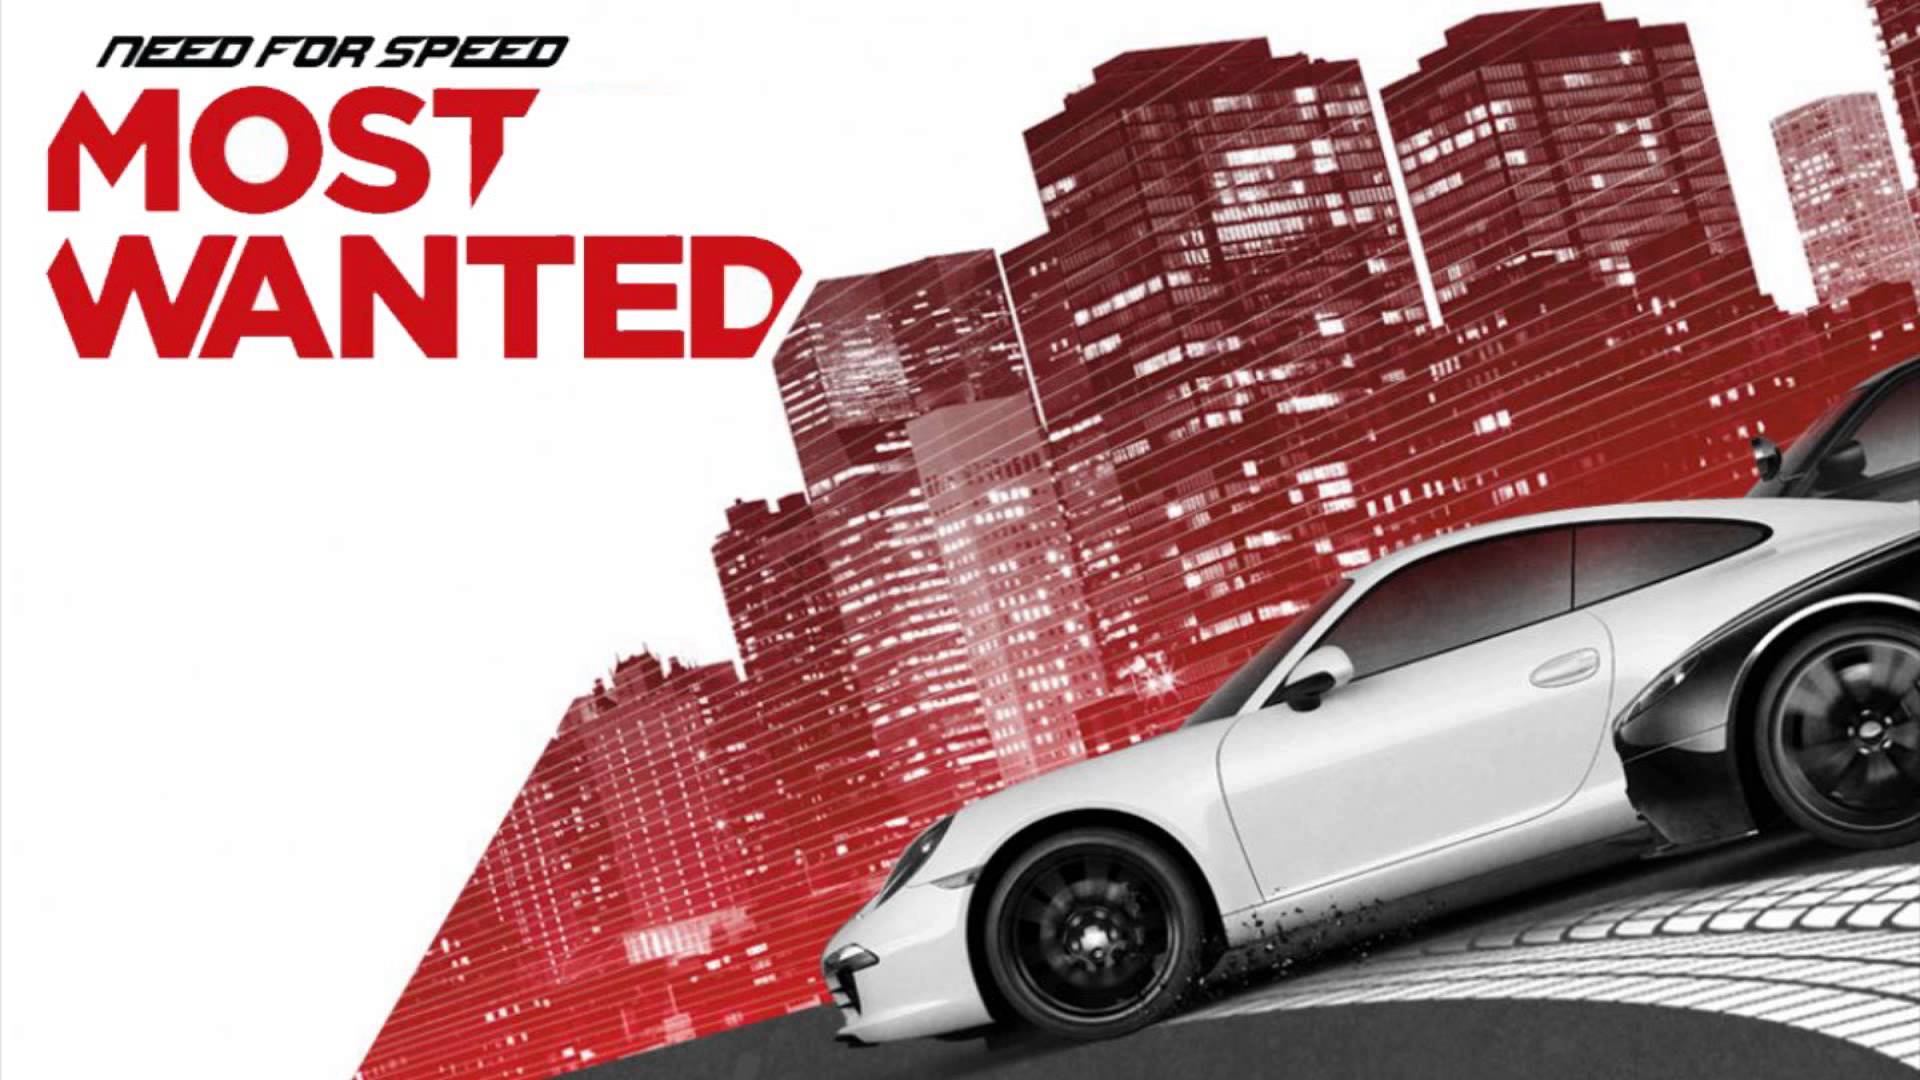 1920x1080 > Need For Speed: Most Wanted (2012) Wallpapers